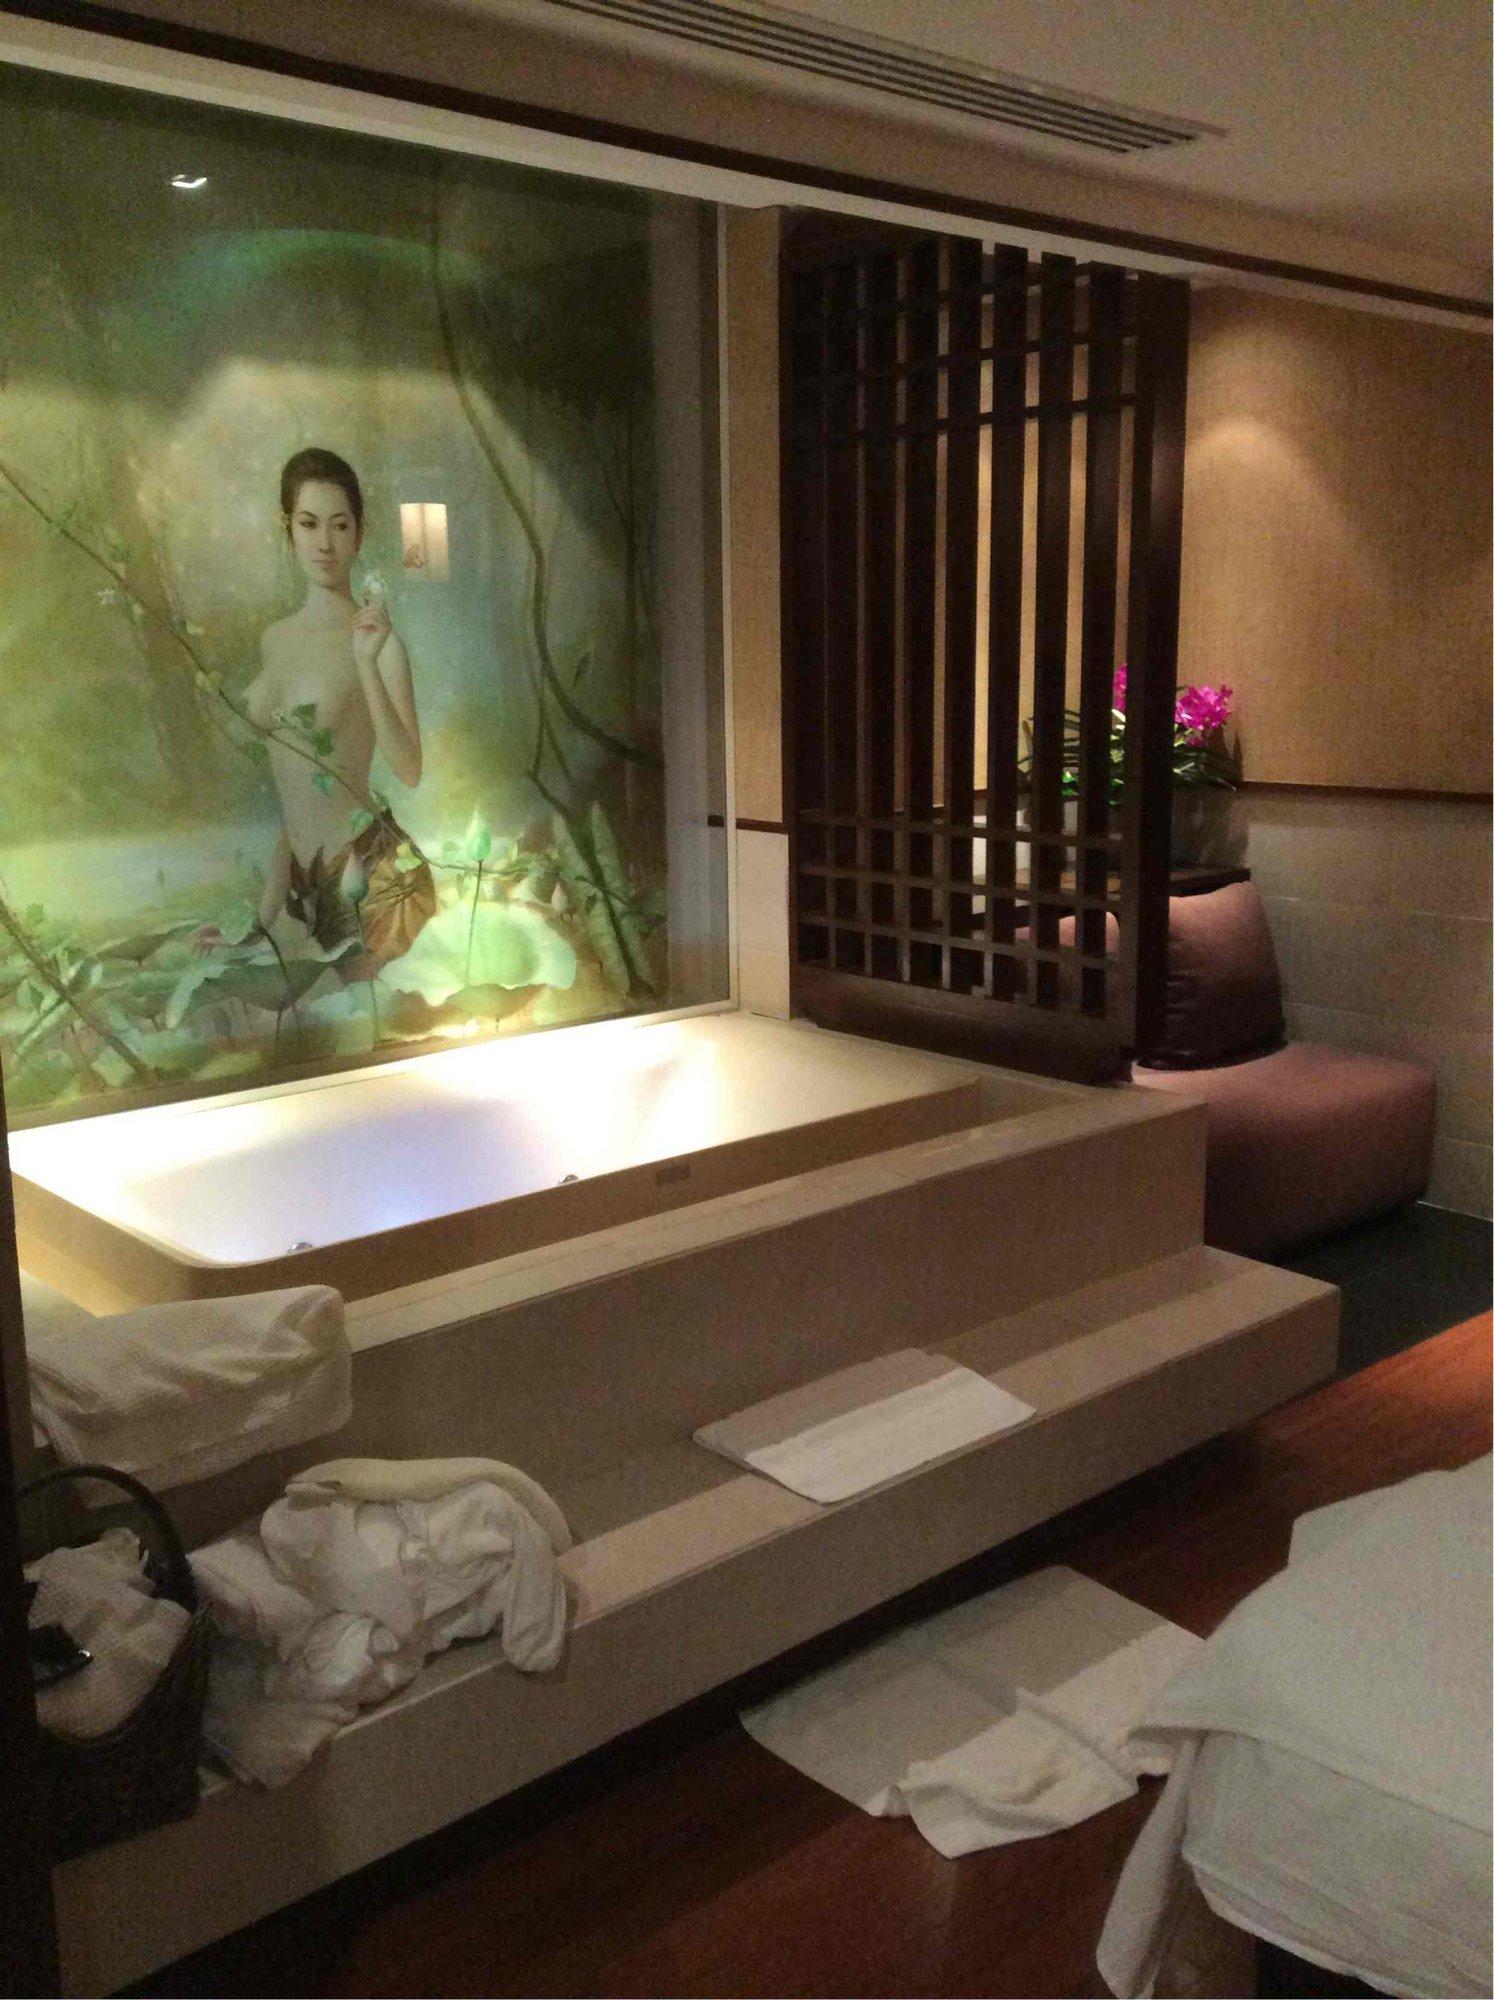 Thai Airways Royal Orchid Spa  image 6 of 25